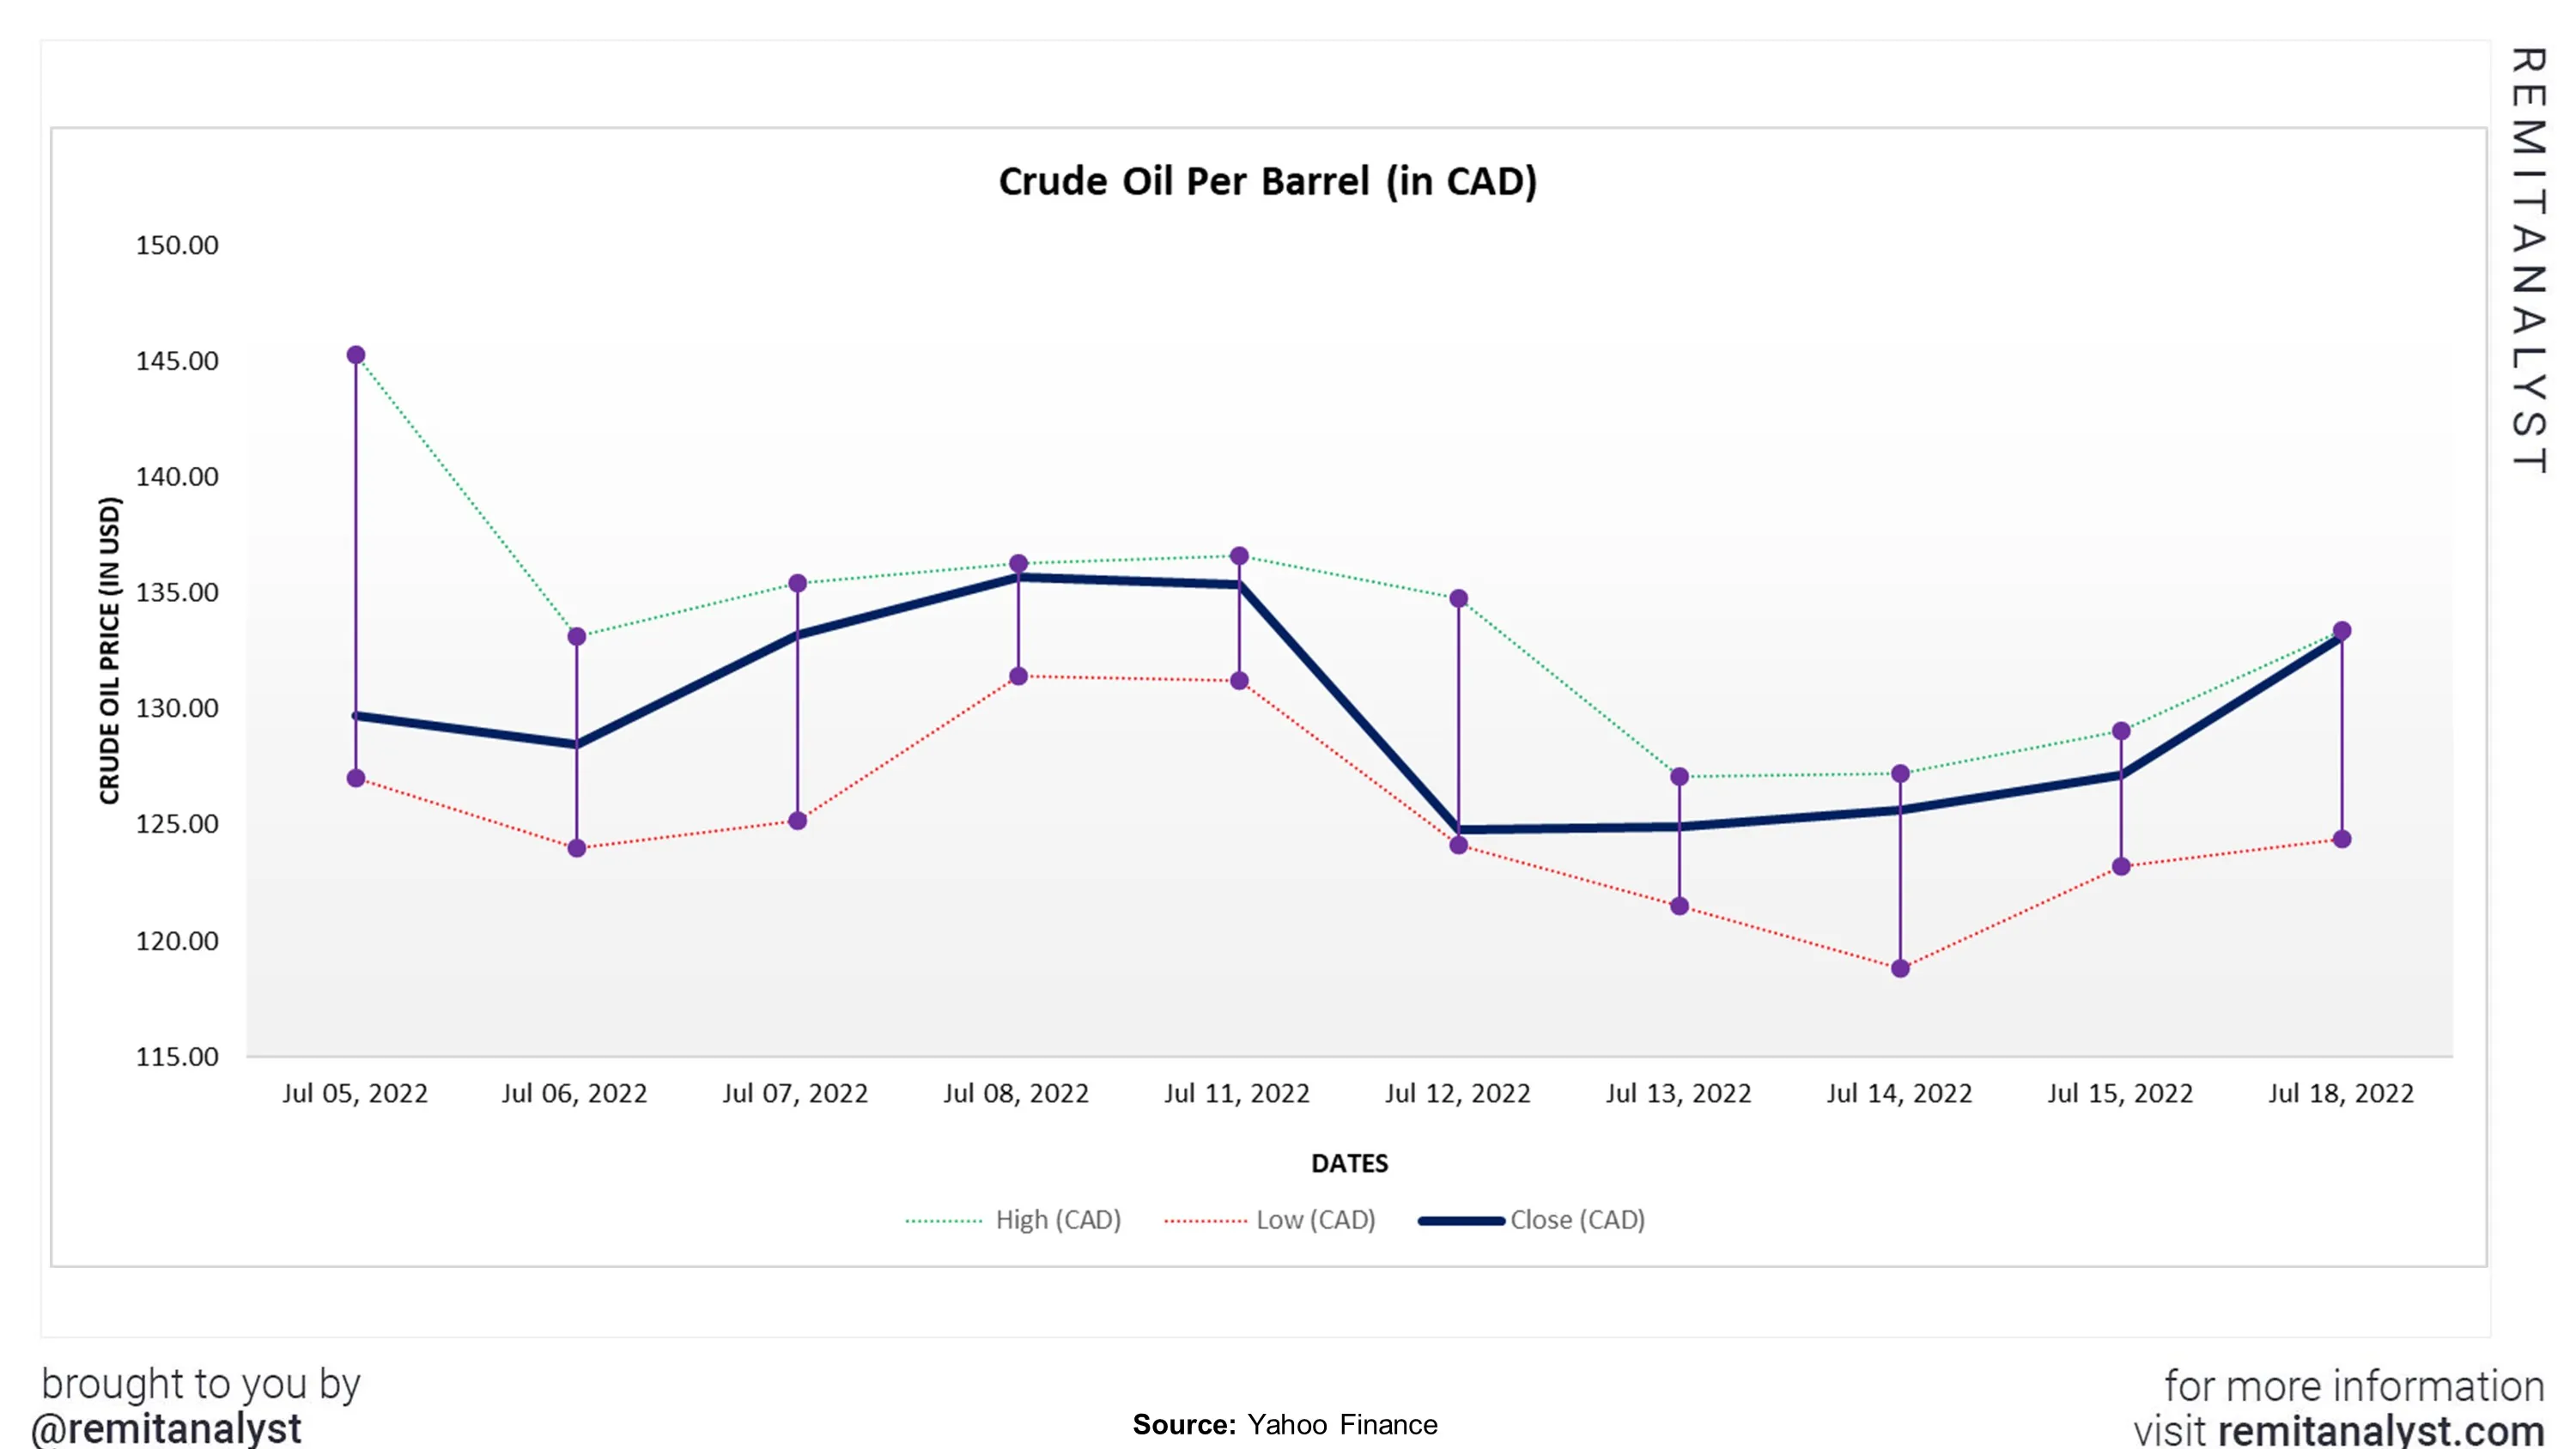 crude-oil-prices-canada-from-7-5-2022-to-7-18-2022